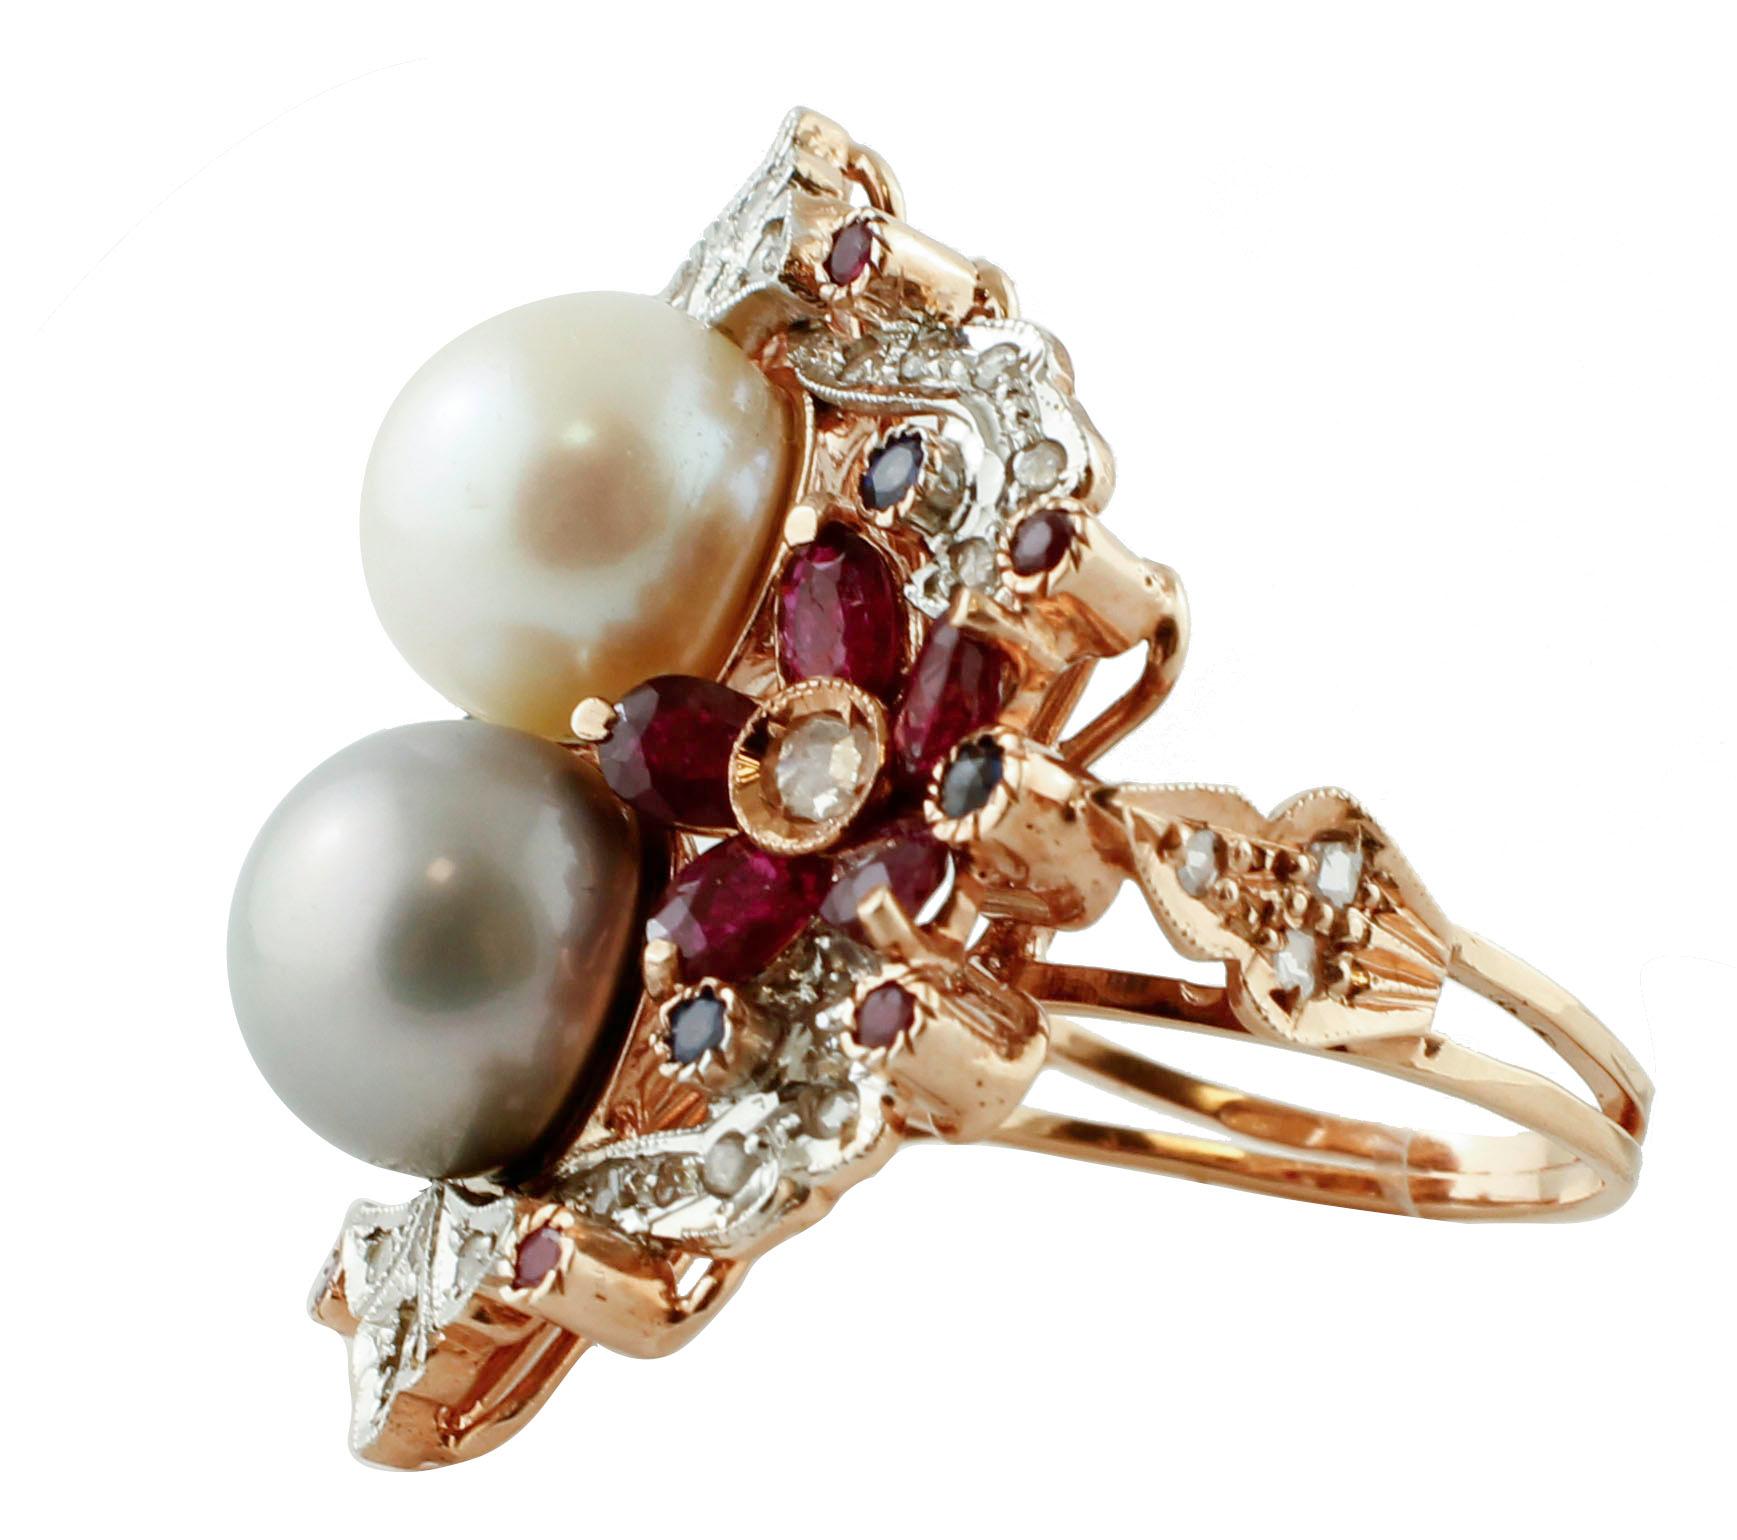 SHIPPING POLICY:
No additional costs will be added to this order.
Shipping costs will be totally covered by the seller (customs duties included). 


Elegant cluster ring in 9 kt rose gold and silver structure, mounted with a white and a grey pearl